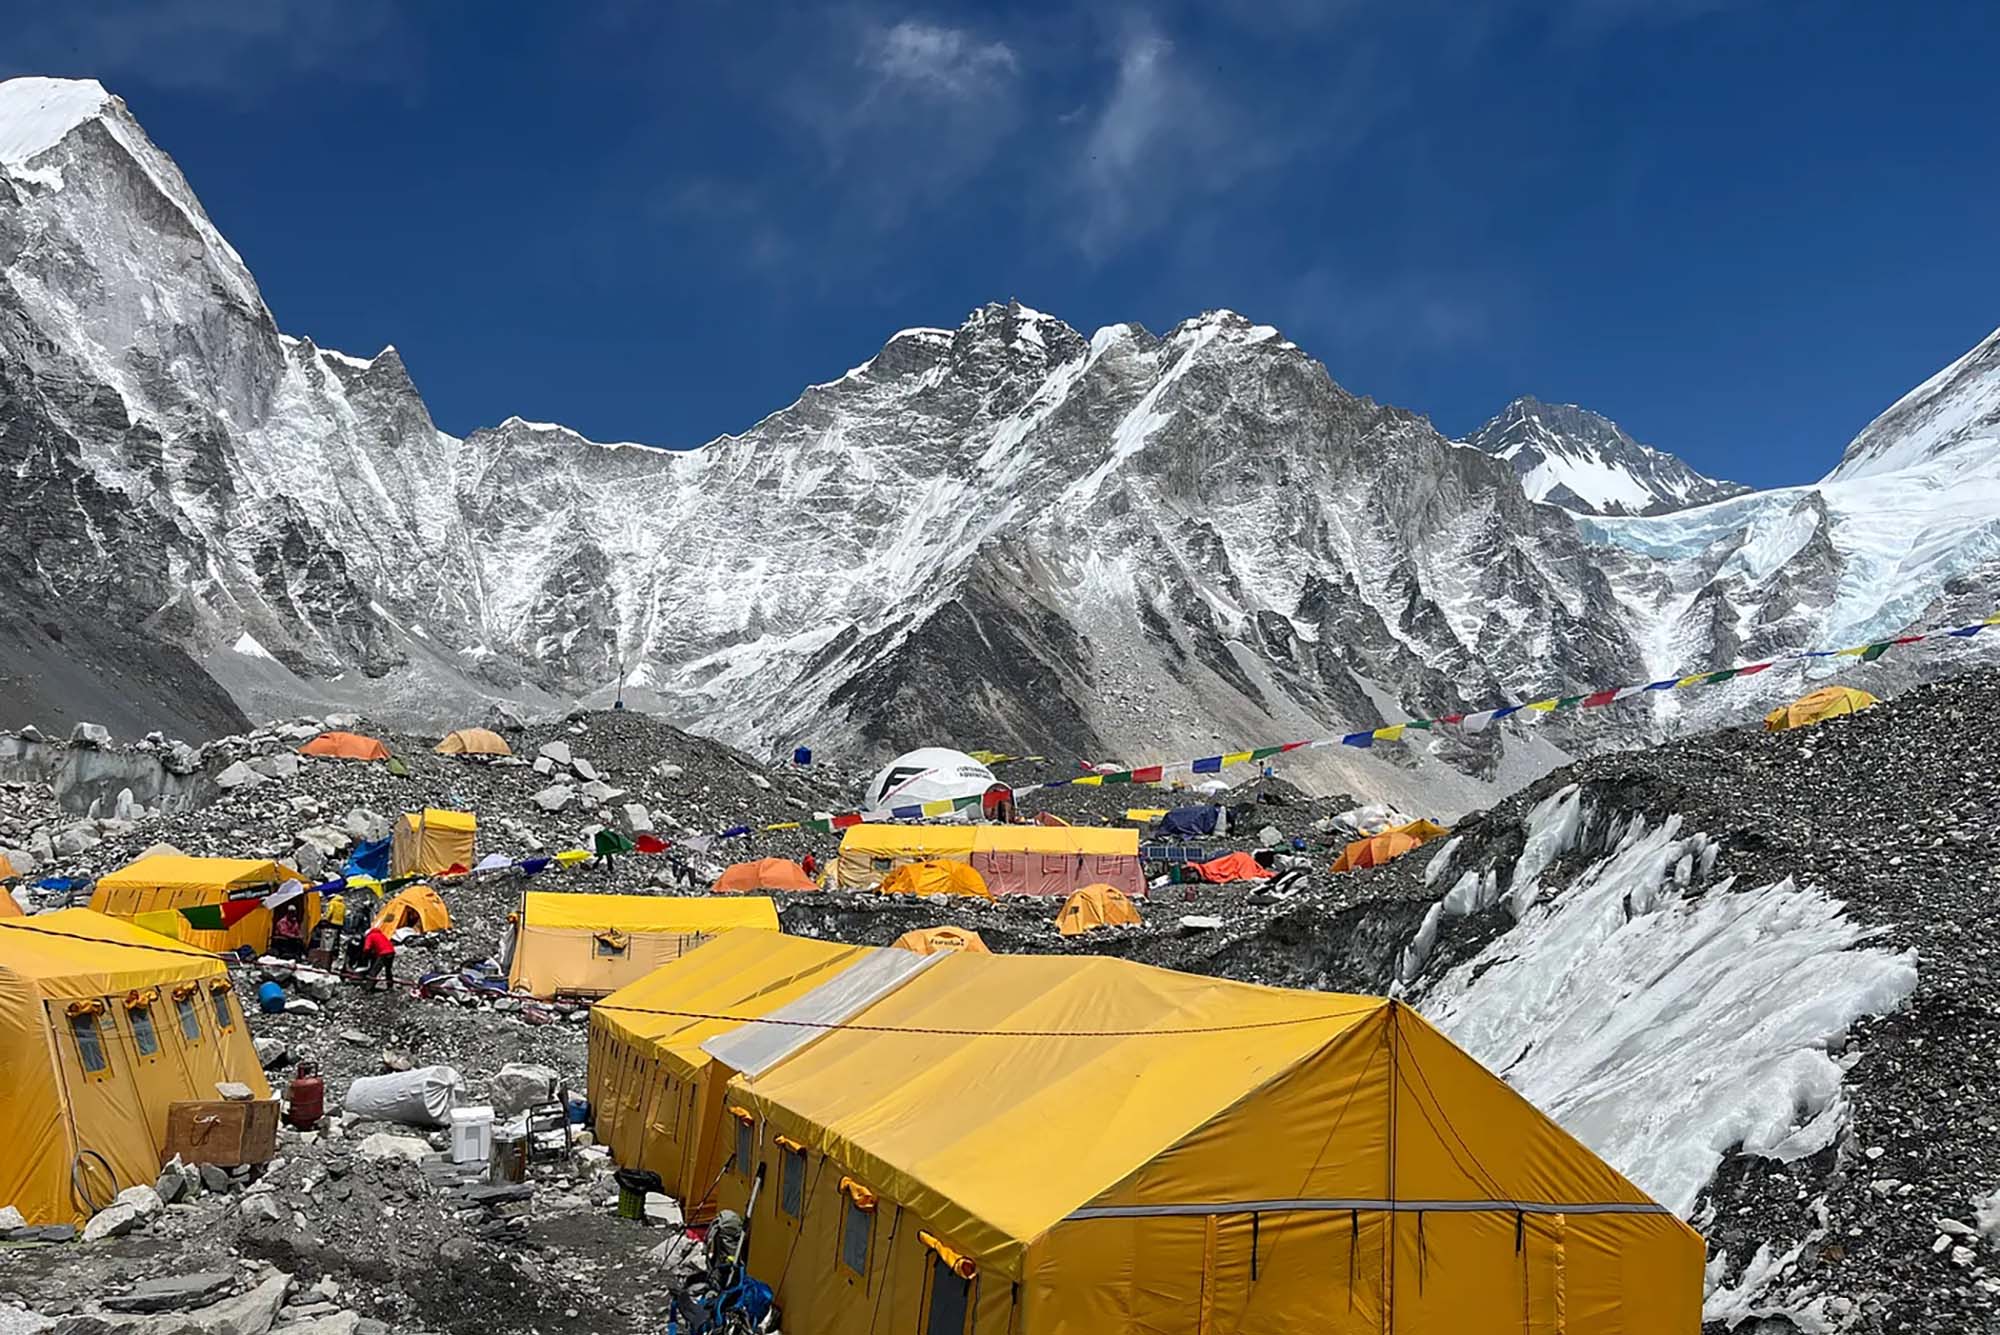 Photo: Photo: A horizontal shot of a base camp on Mt. Everest. Snow covers the ground and the elevated areas. On top of the snow are various yellow tents making up the base camp. The sky is bright and blue.